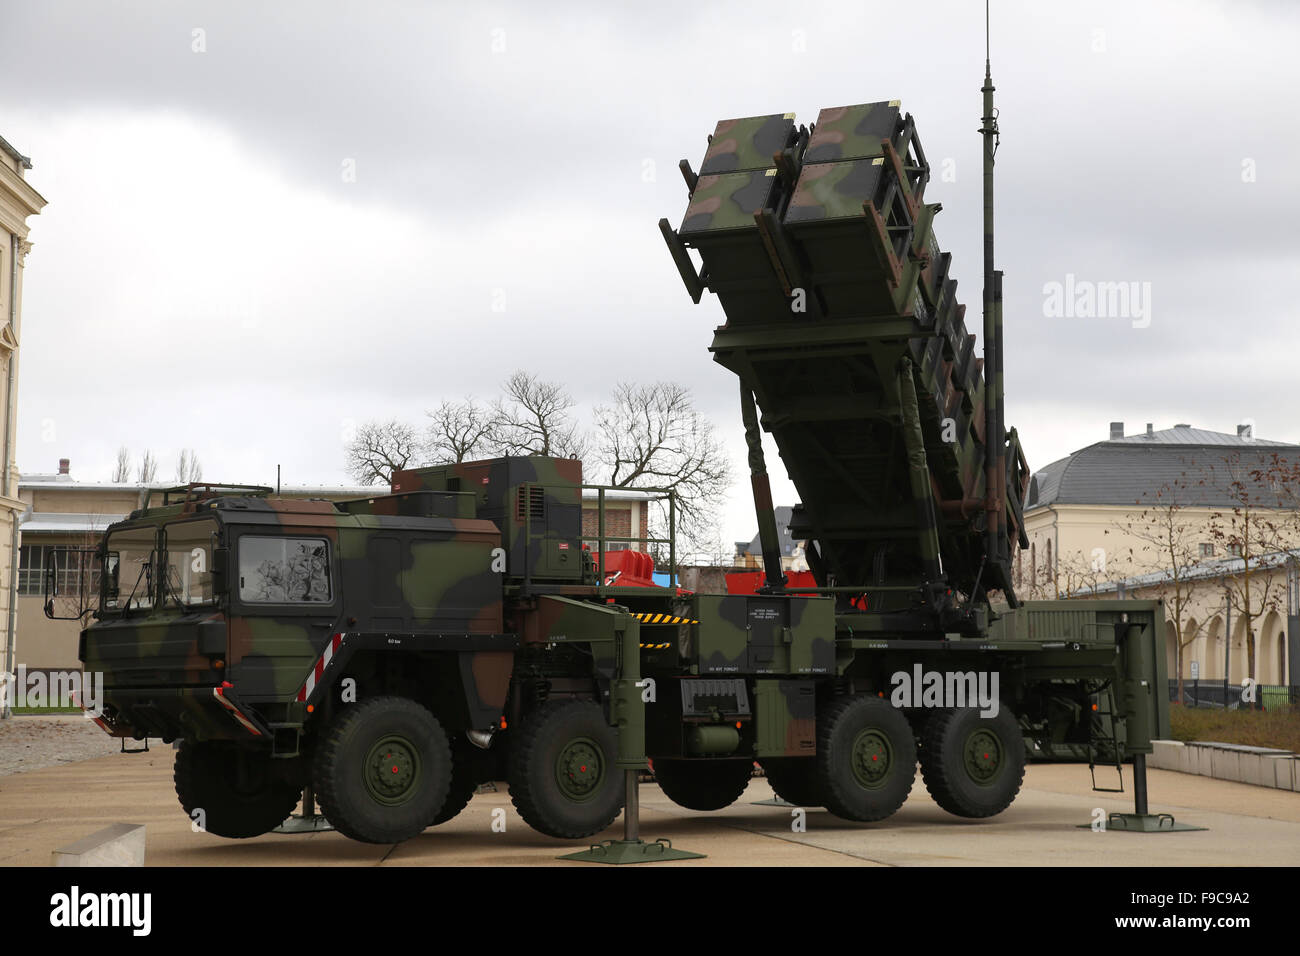 A German Army Patriot surface-to-air missile system. Stock Photo